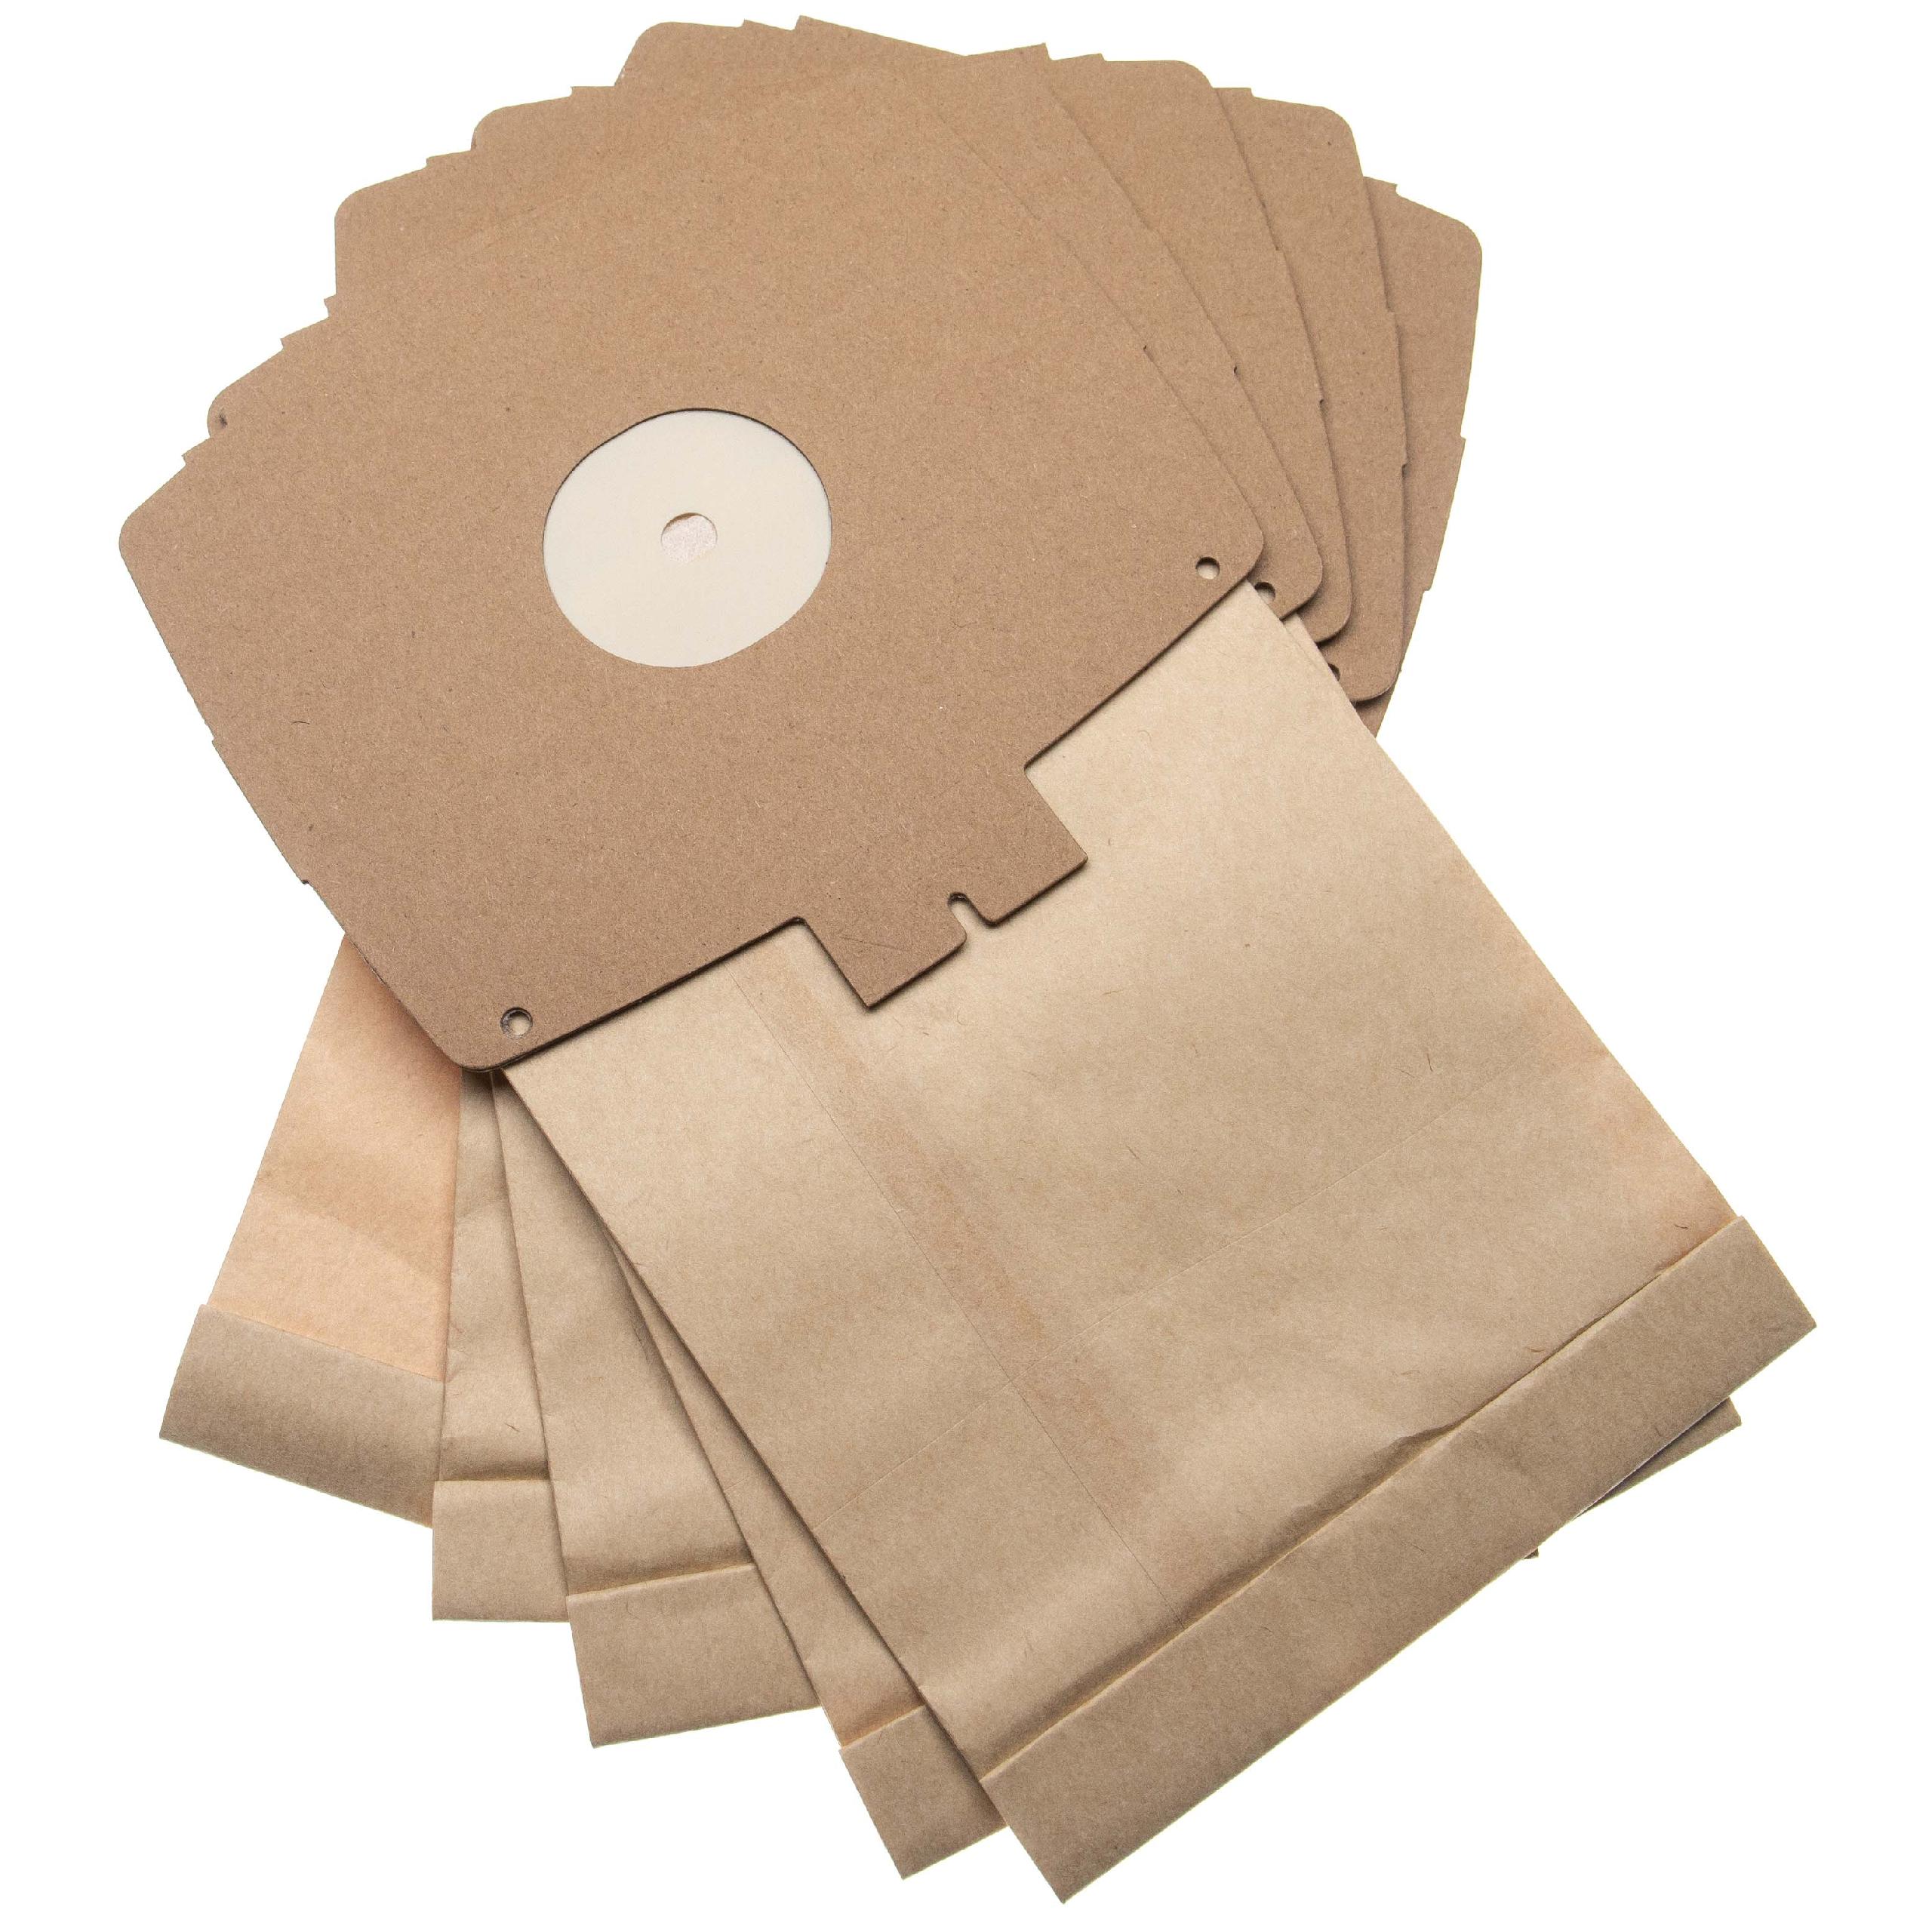 5x Vacuum Cleaner Bag replaces Electrolux E6N, E6 for Turbomatic - paper